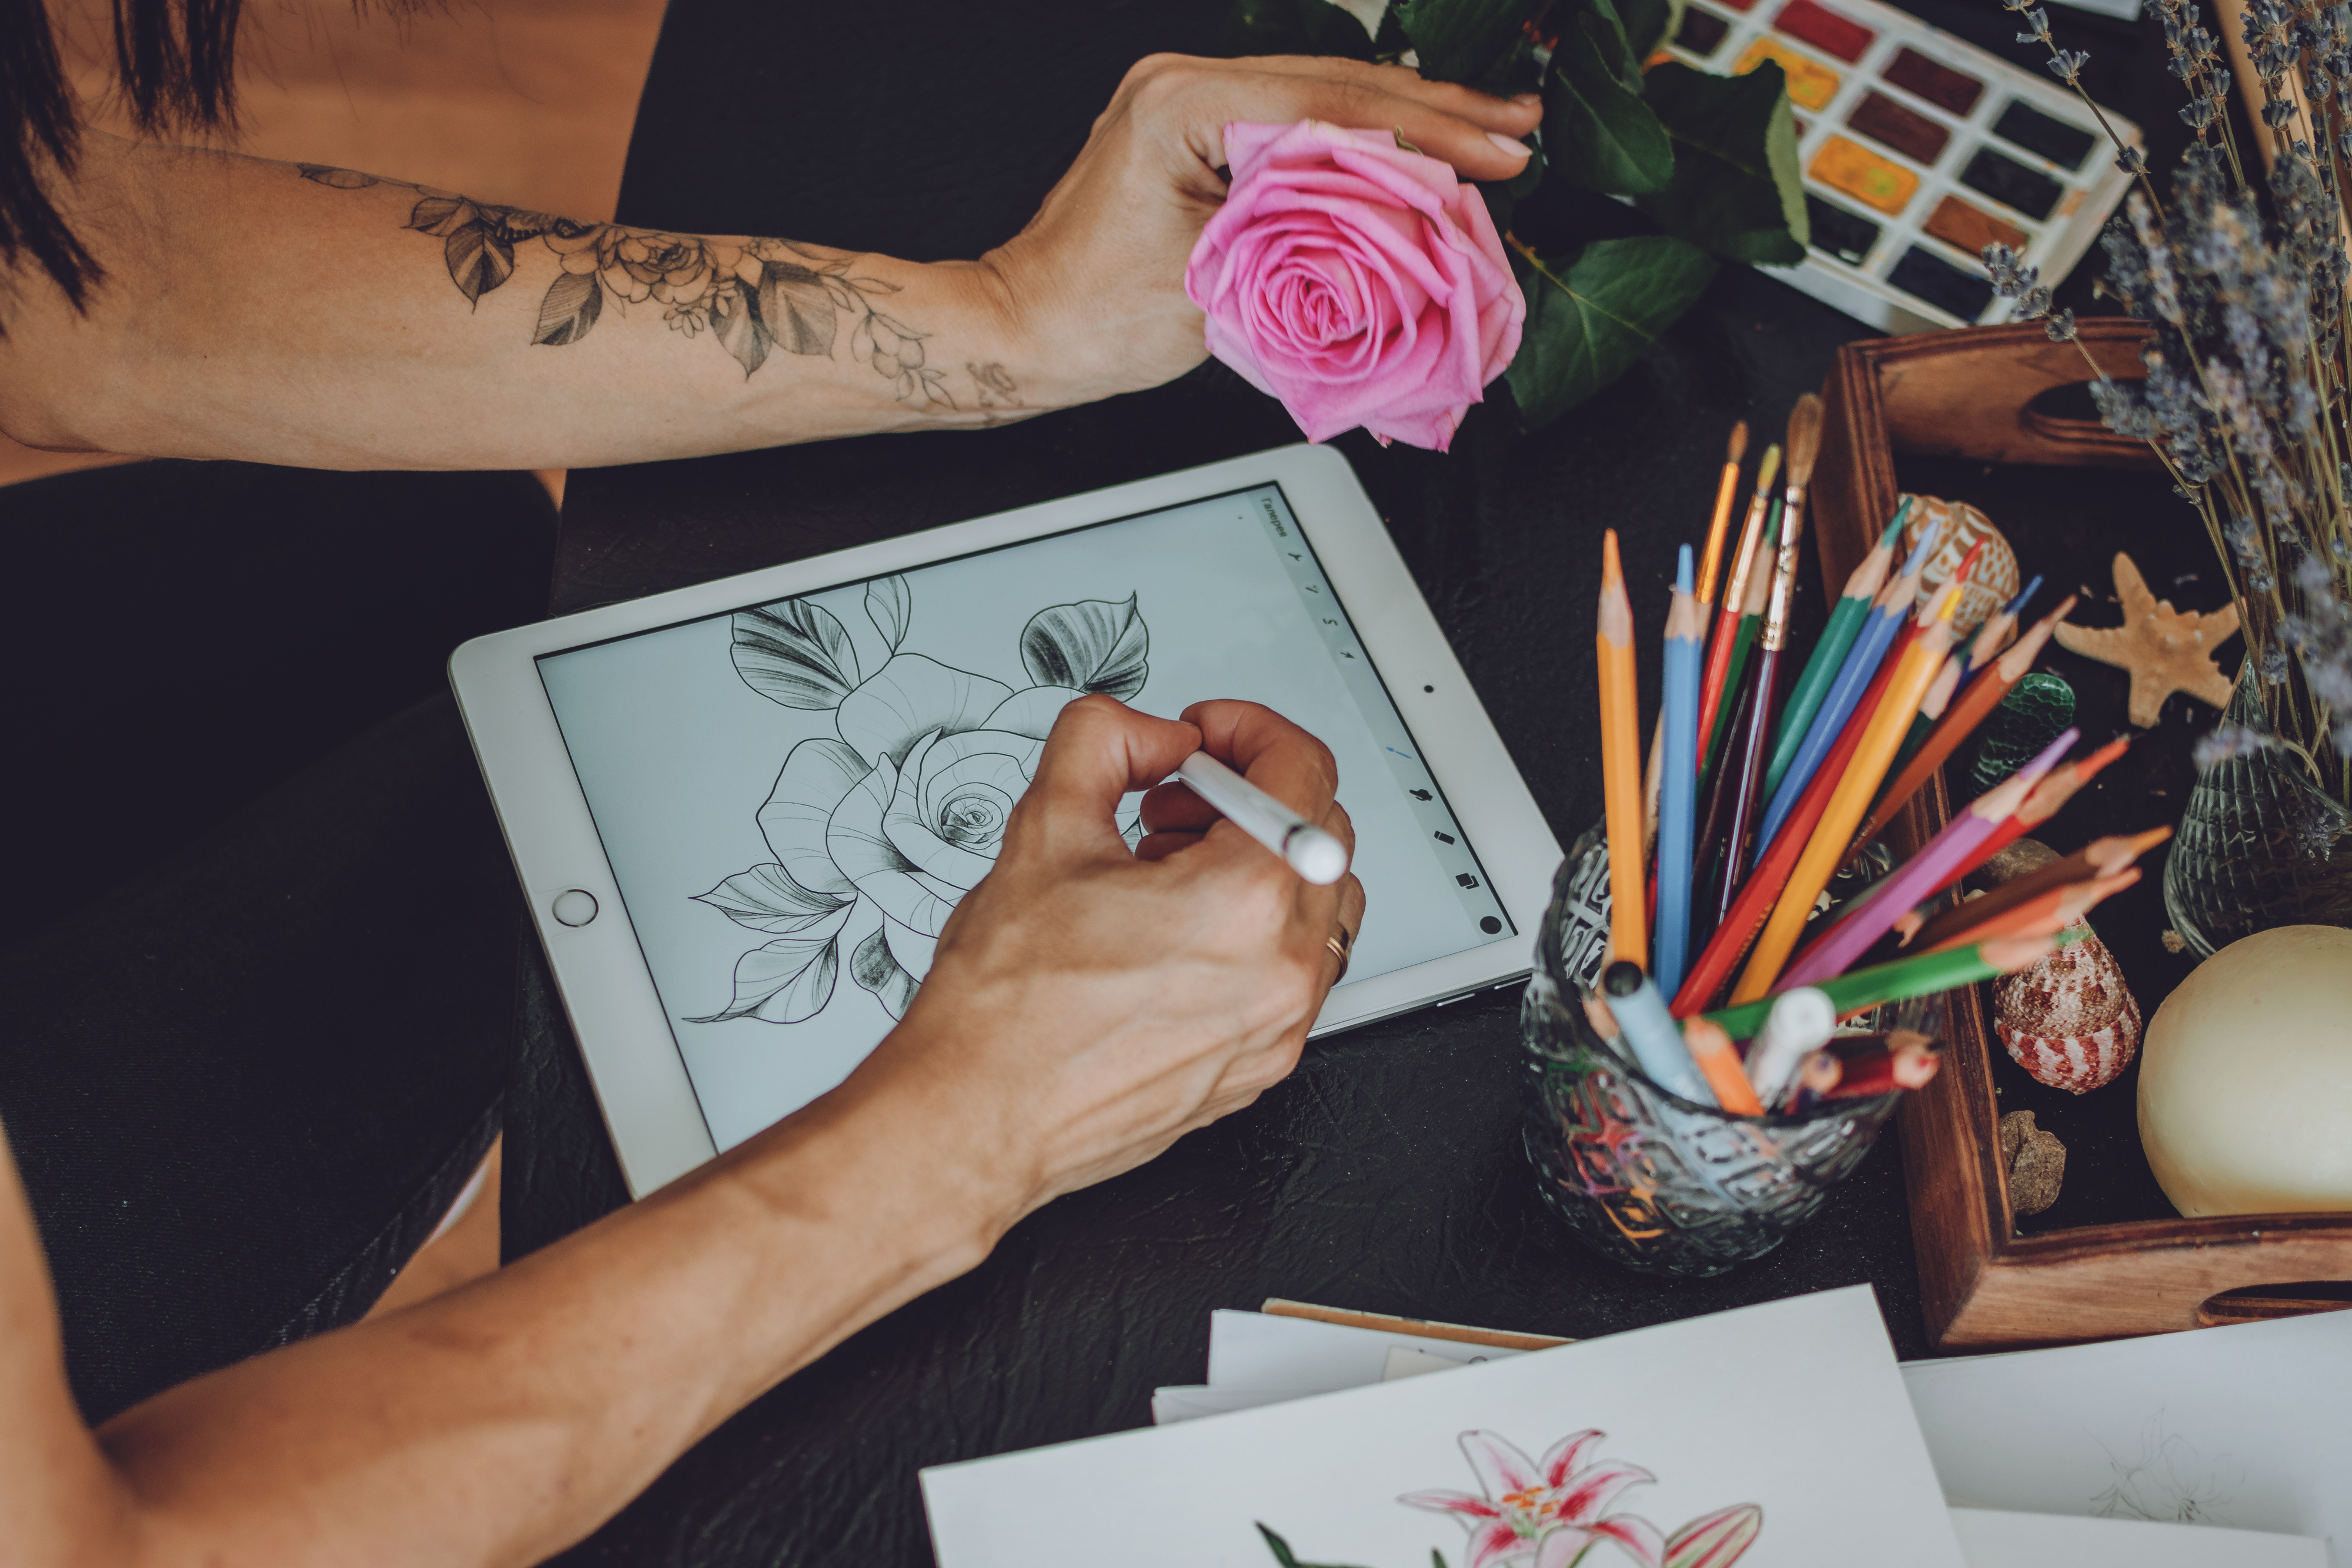 Person using an Apple Pencil to draw an image of a rose on an iPad